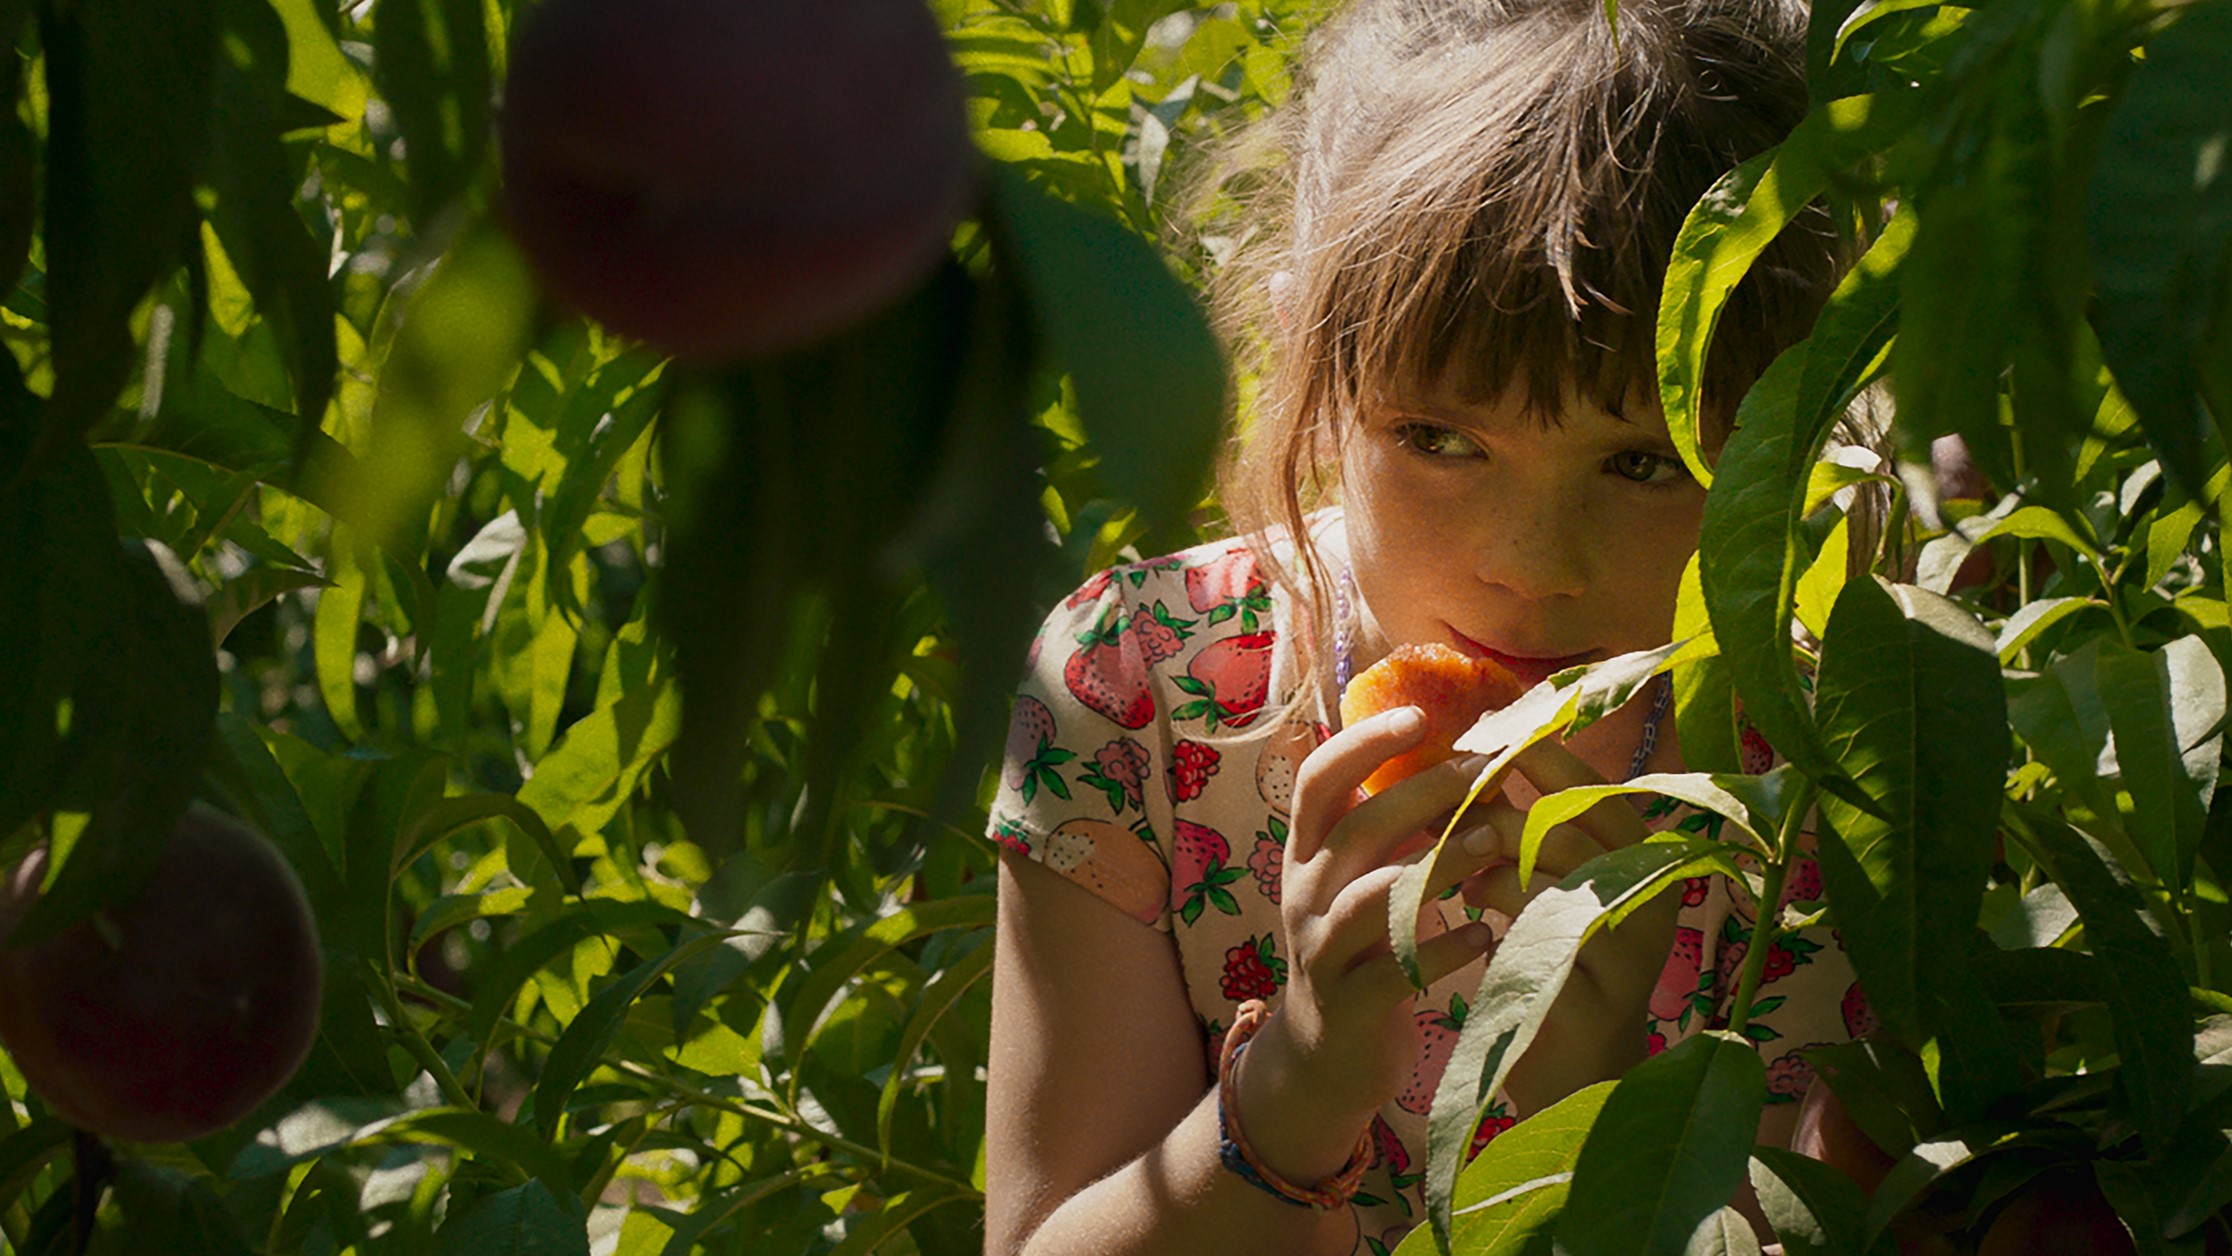 In photo: A girl hiding behind the bushes. Photo from the movie Alcarràs.